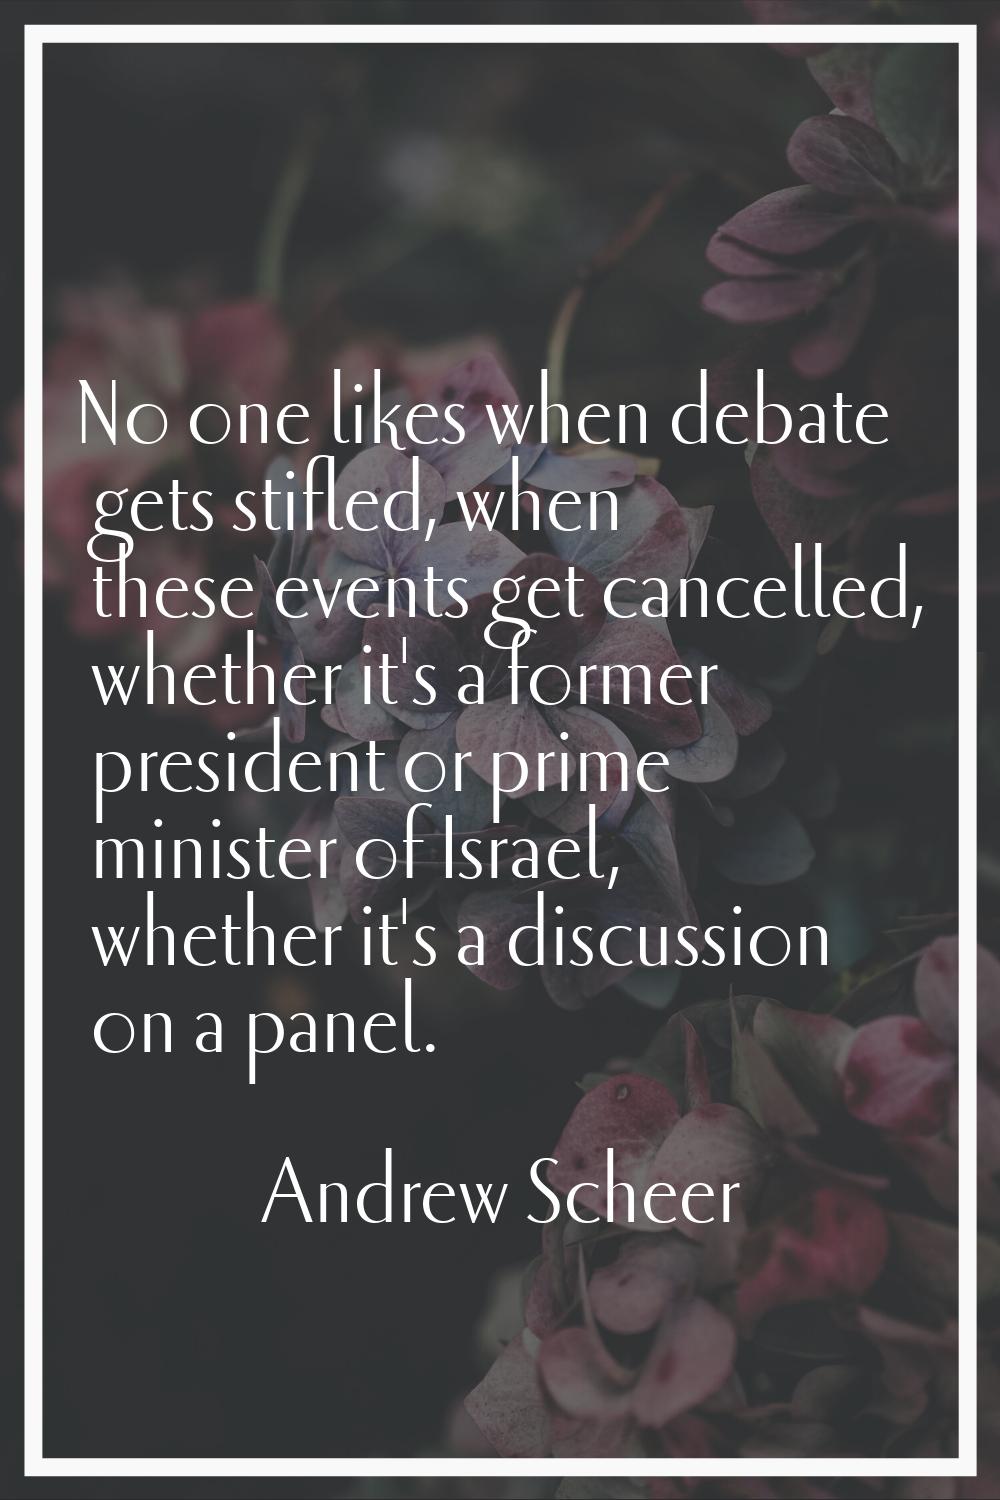 No one likes when debate gets stifled, when these events get cancelled, whether it's a former presi